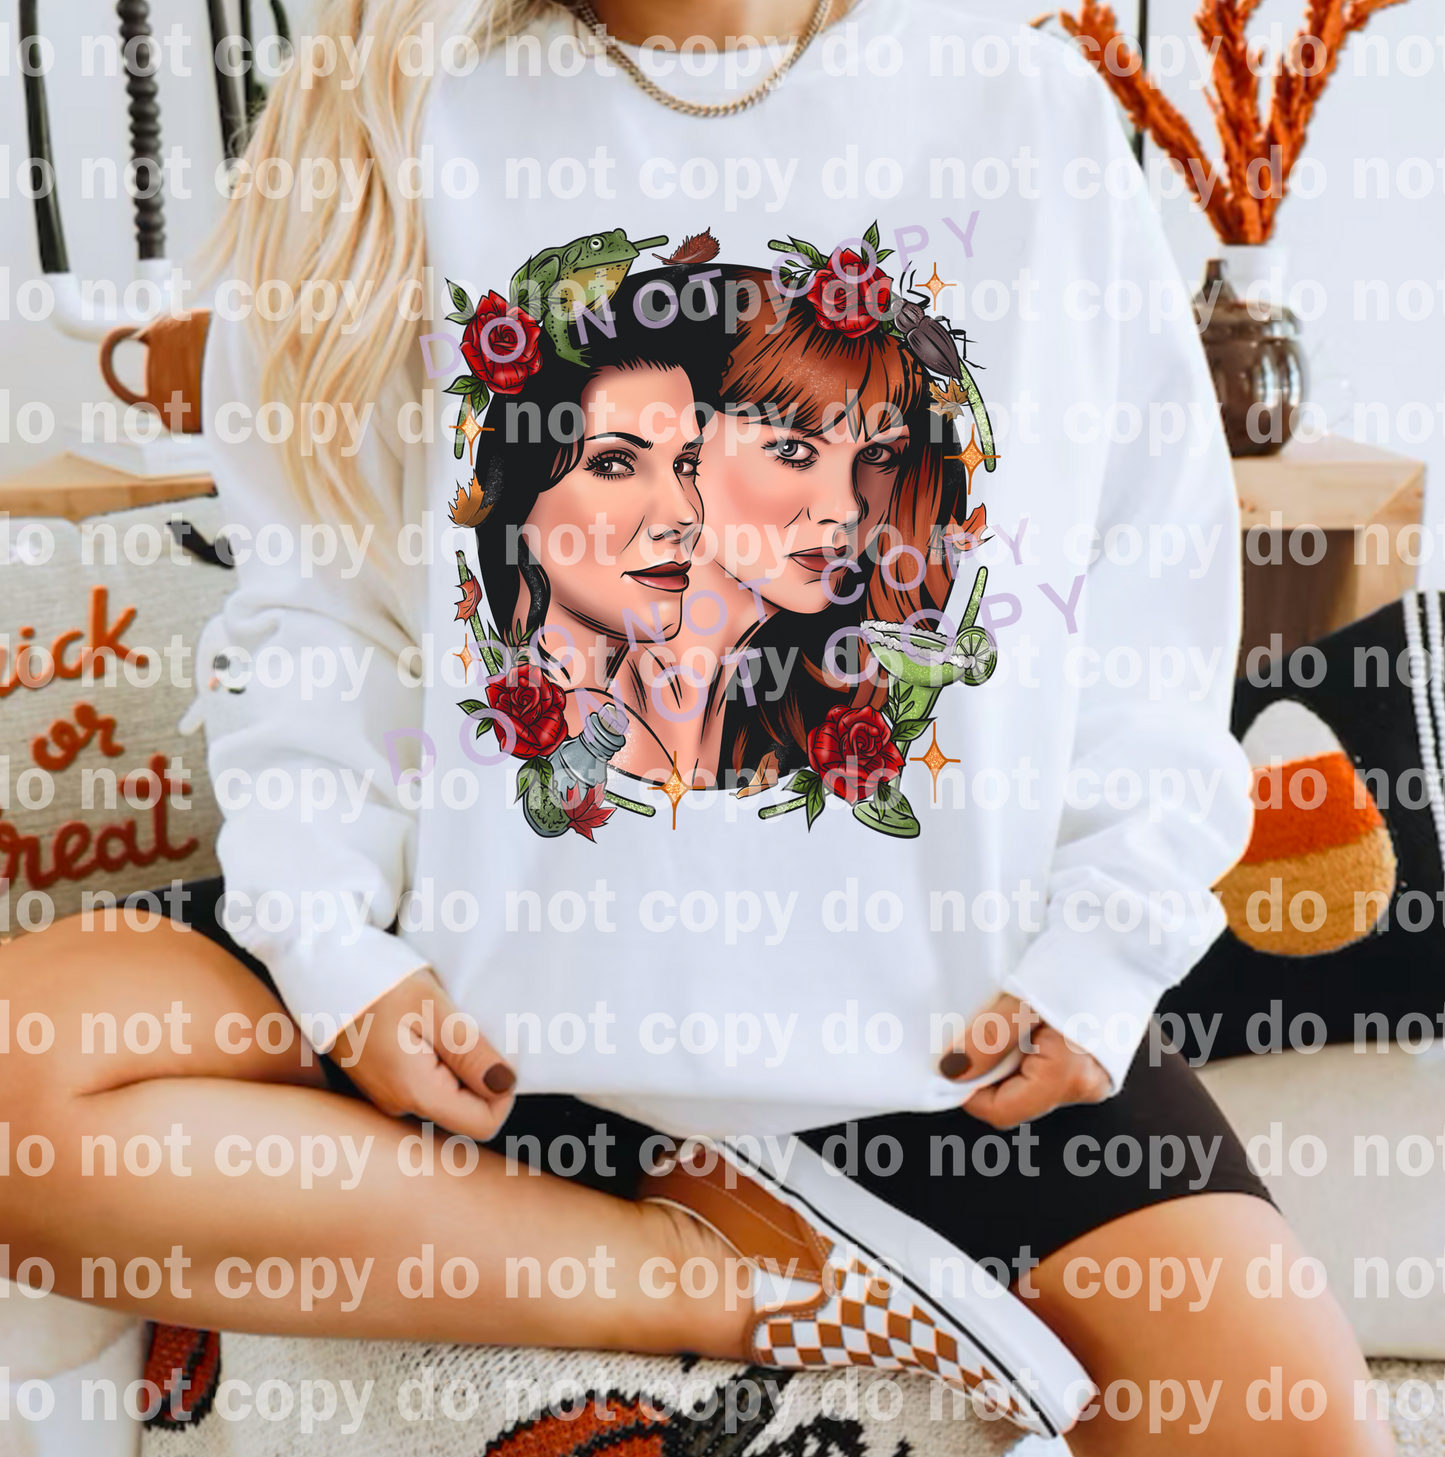 Sisters Floral Margaritas with Optional Sleeve Design Dream Print or Sublimation Print